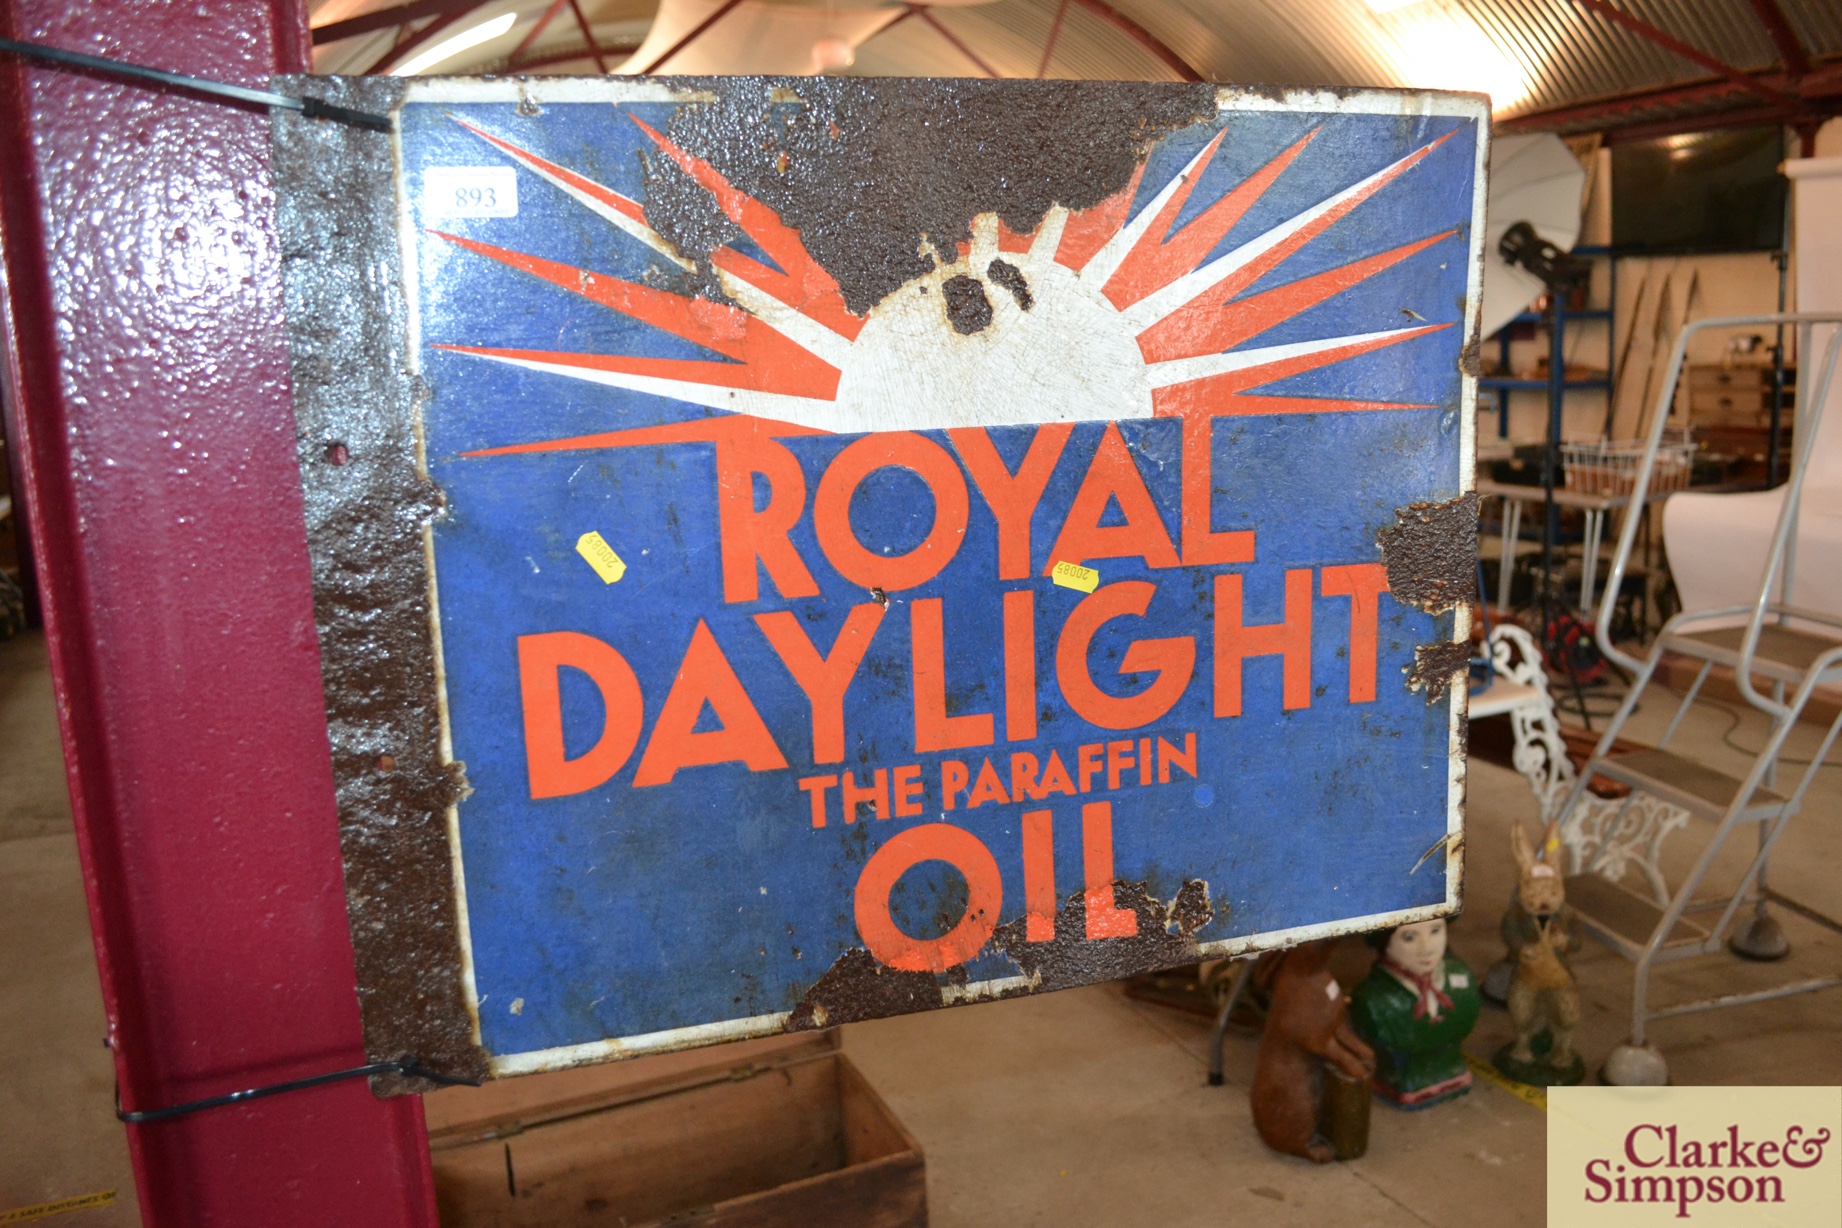 A double sided enamel advertising sign for "Royal